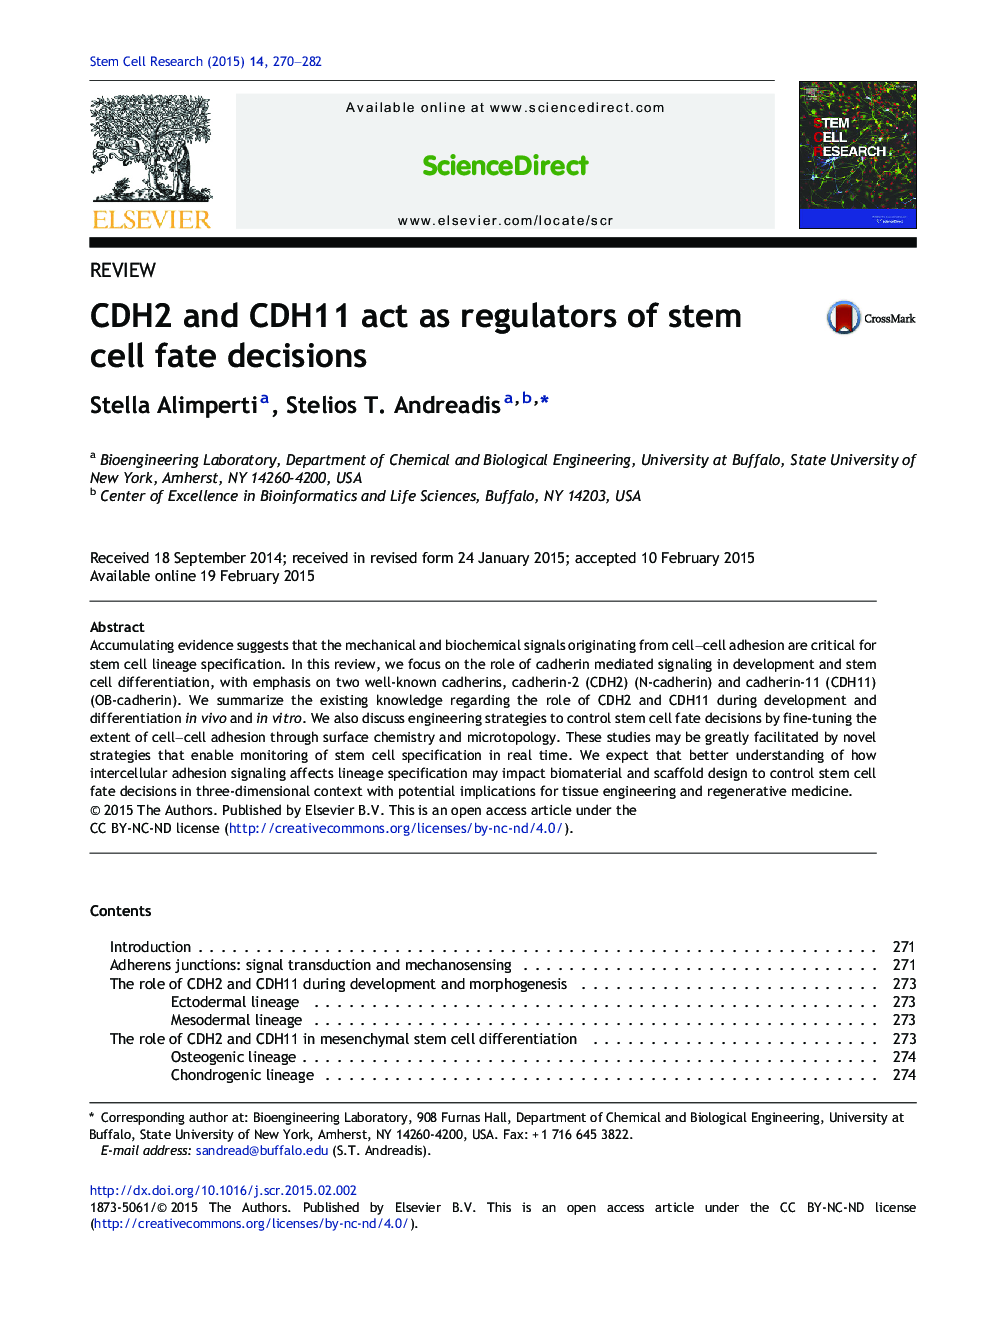 CDH2 and CDH11 act as regulators of stem cell fate decisions